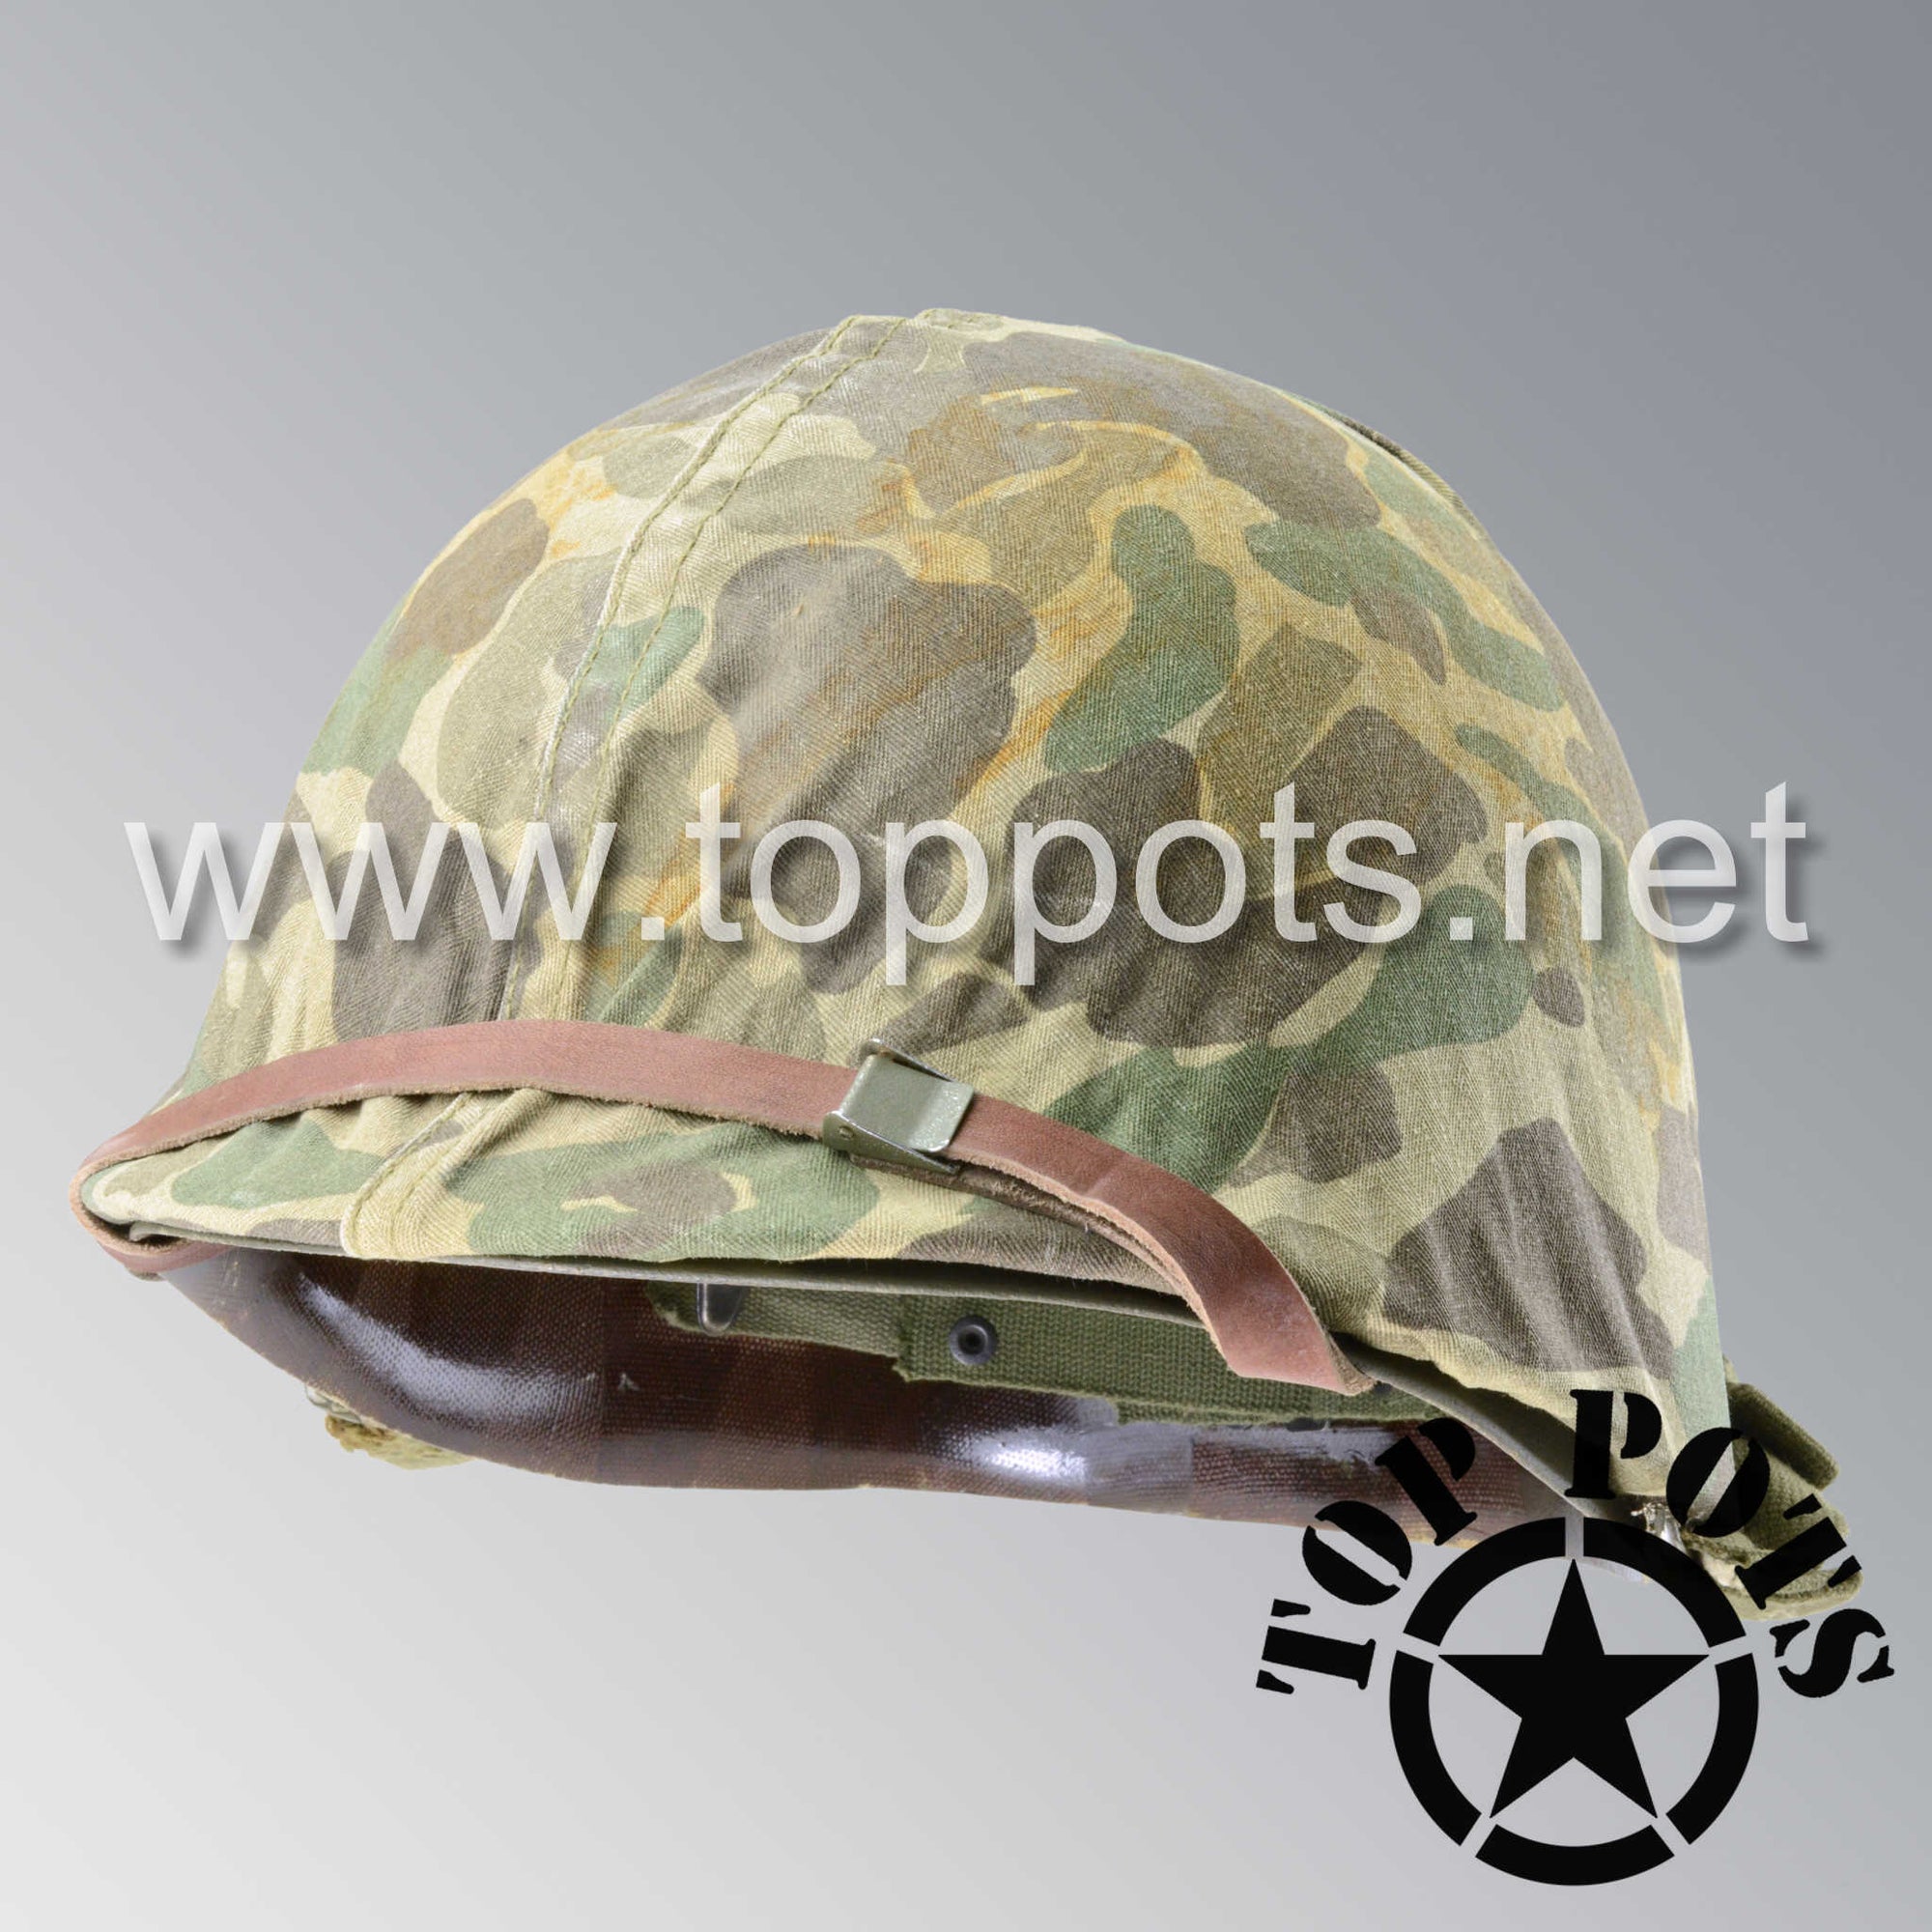 Korean War USMC Restored Original M1 Infantry Helmet Swivel Bale Shell and Liner with Marine Corps Camouflage Cover